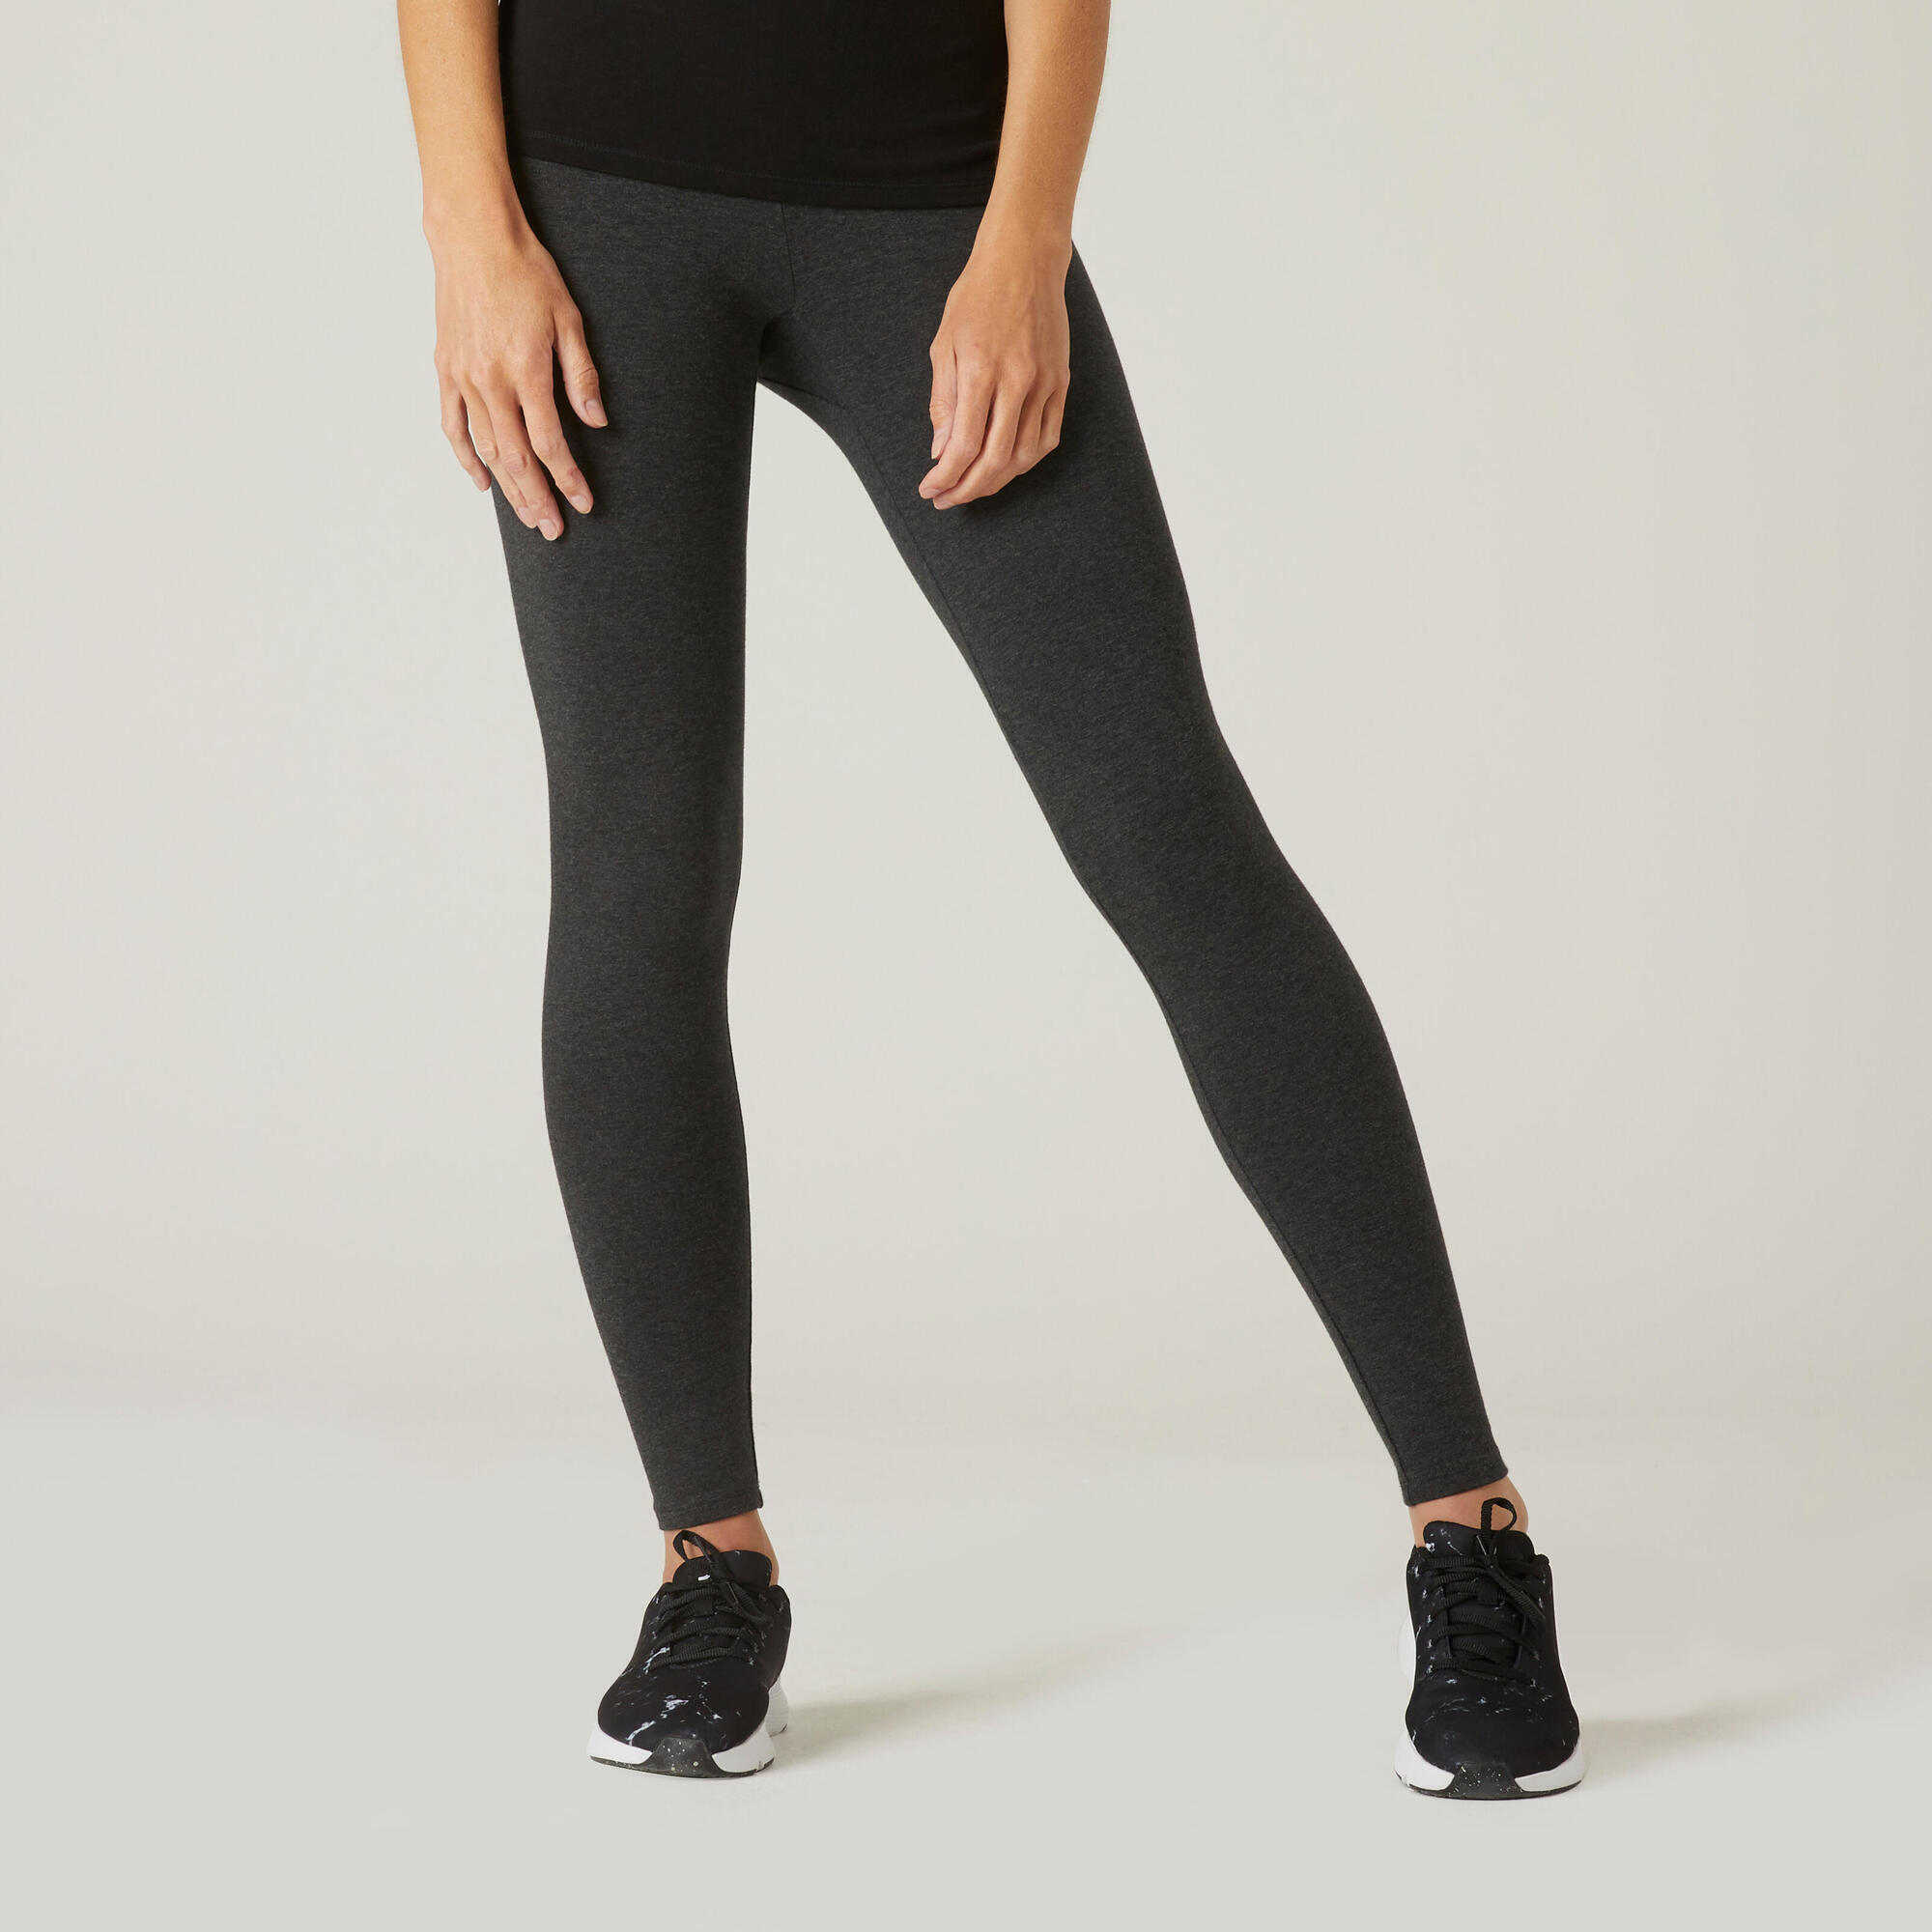 Zyia Light And Tight Leggings Review